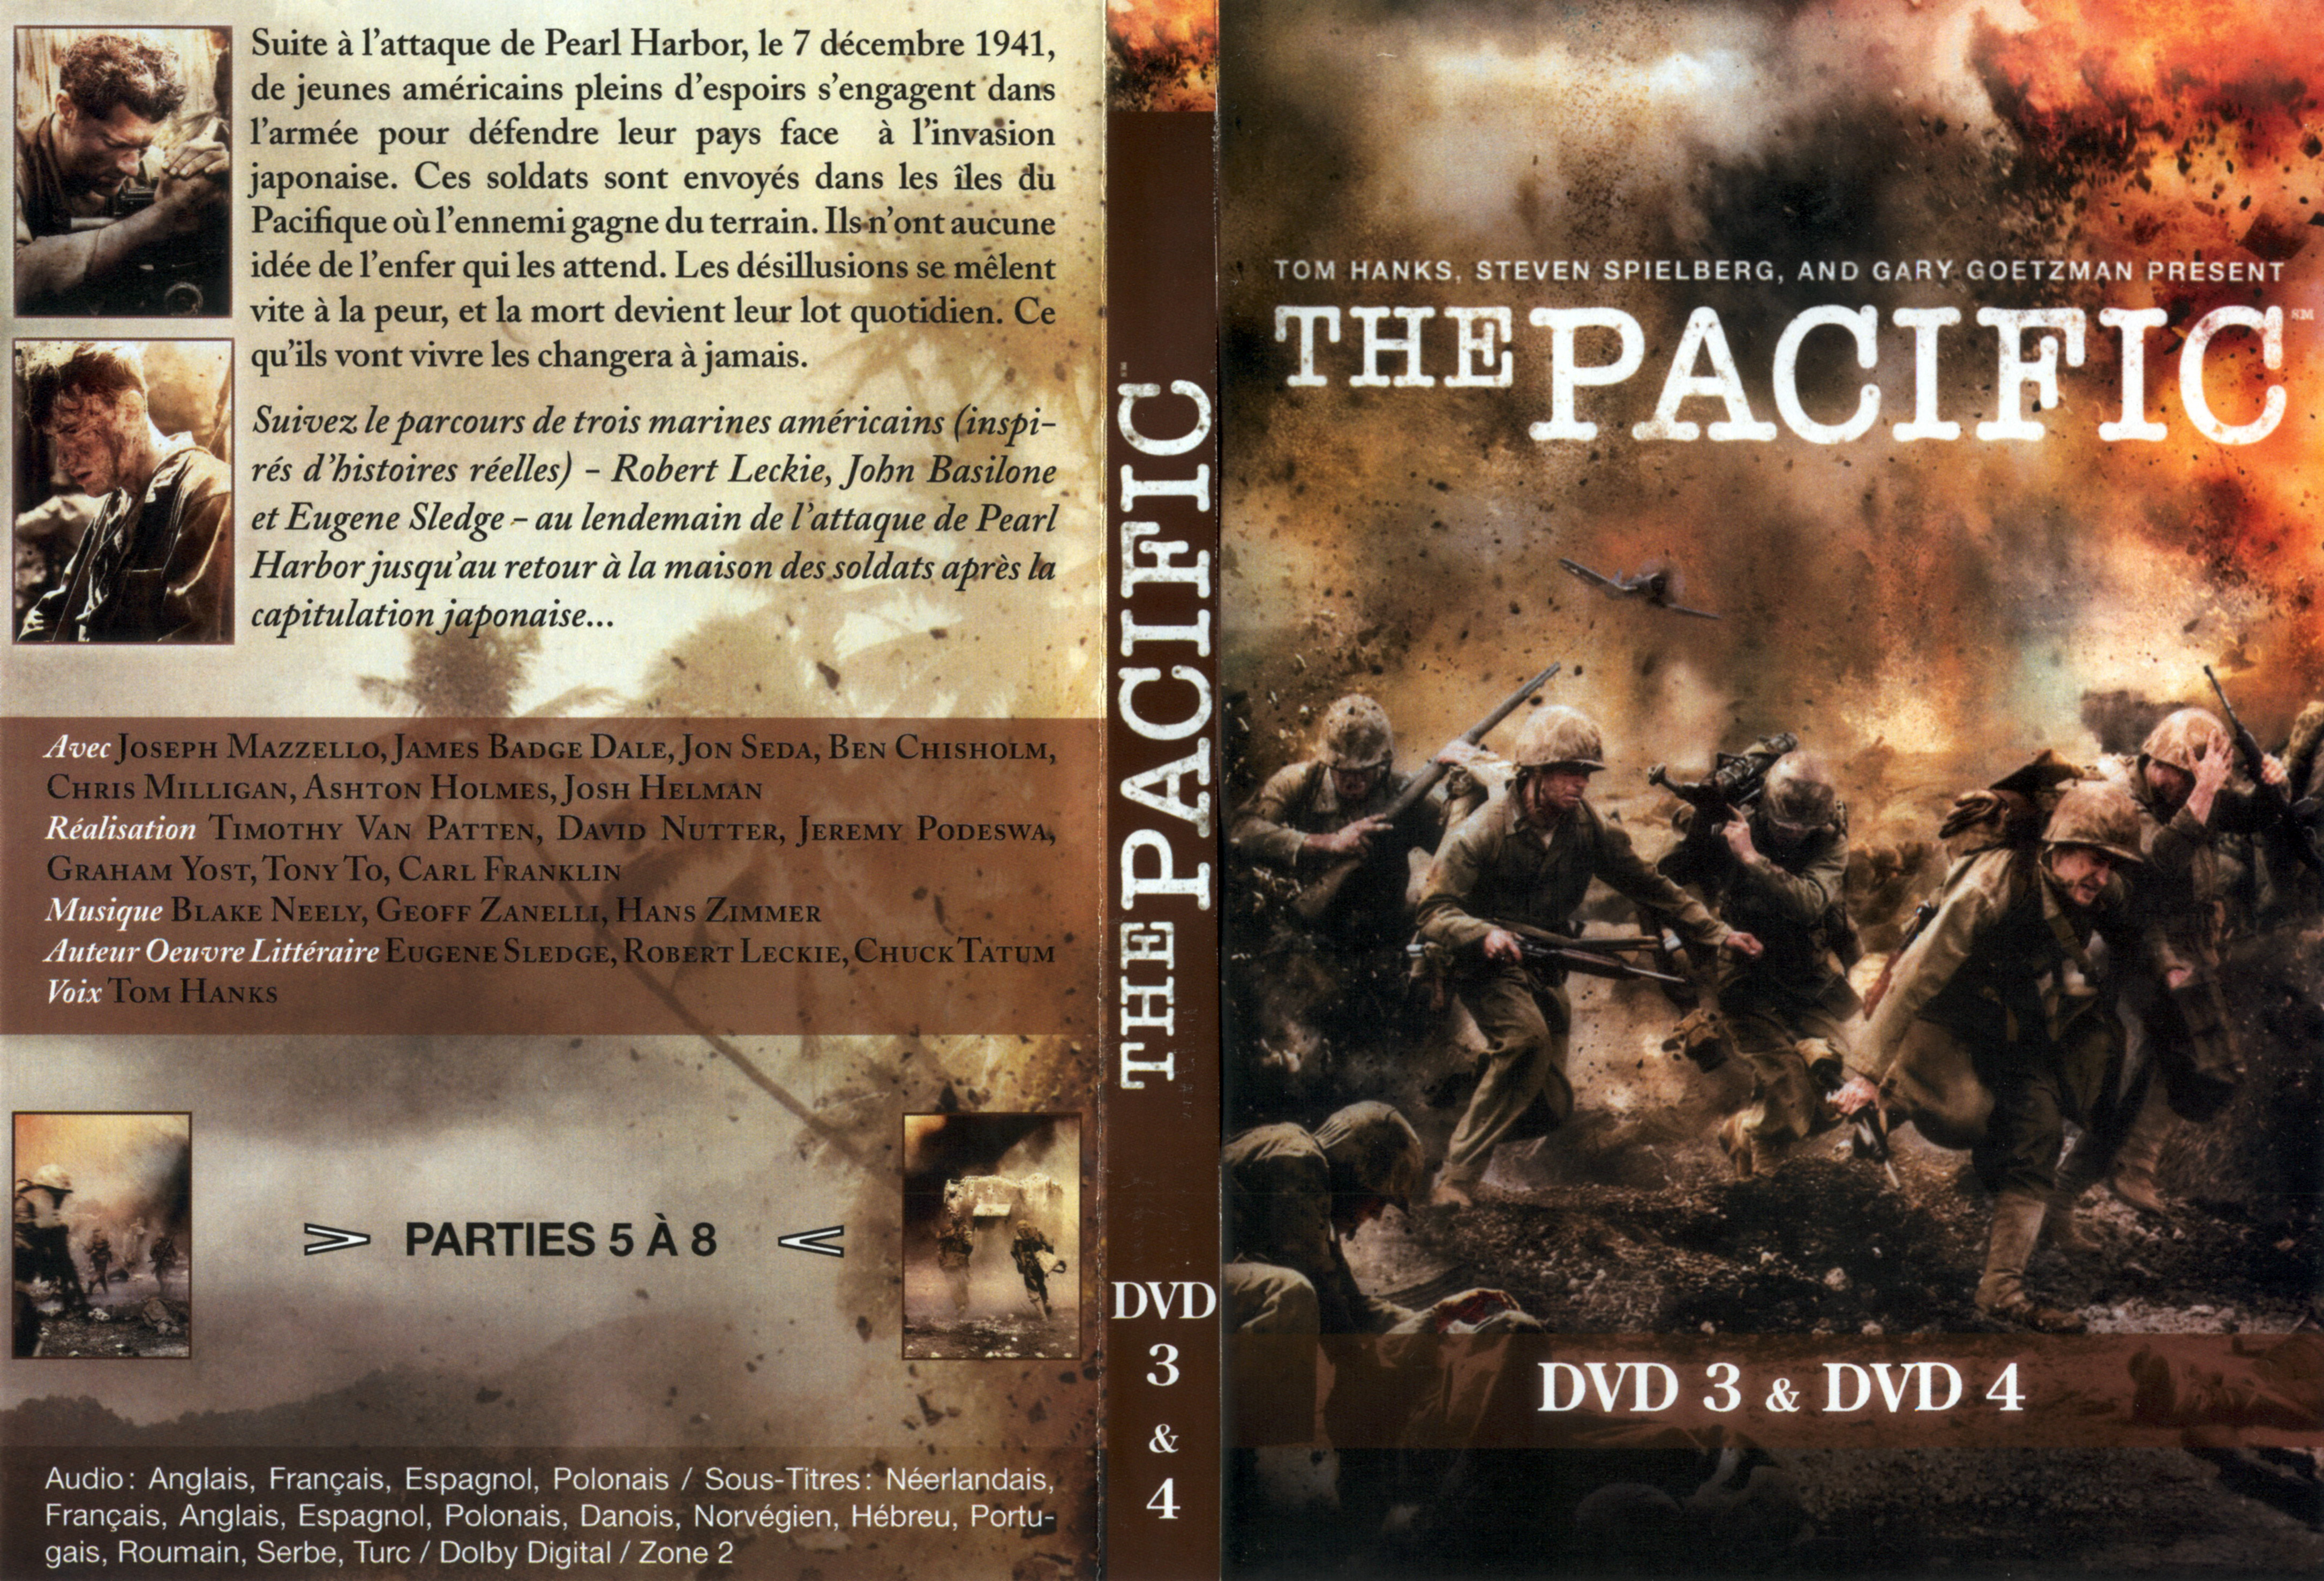 Jaquette DVD The Pacific DVD 2